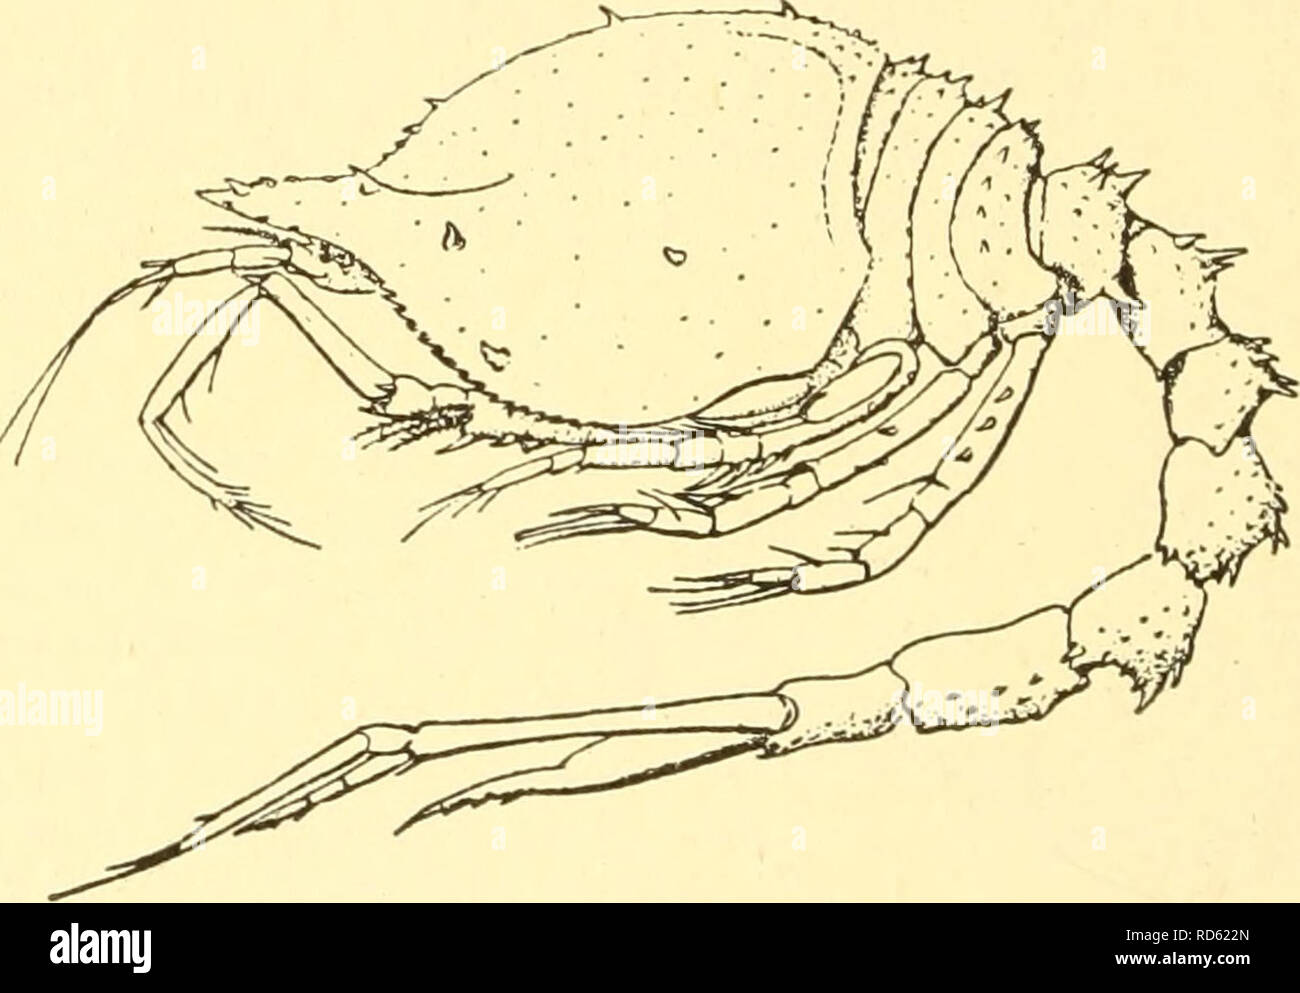 . Cumacea (Sympoda). Cumacea. 106 Cumacea: 11. Diastylidae, 1. Diastylis not elongate. Maxilliped 3, 2°&lt;^ joint not expanded or produced distally. Peraeopod 1. 2^^ joint much bent, not as long as rest of limb. 5*^ joint slightly longer than 7*^ 6^^ than b^^. Peraeopod 2, 5*^ joint subequal to 6^^ and 7*^^ combined, 7^^ longer than H^^. 3*^ and 4*^1 pairs without exo- pods. Exopod of uropods a little shorter than the telson. a little longer than the endopod, of which the 1^* joint is about twice the 2&quot;'^ or 3*^, with 3, 1. 1 spines on the medial margin of the joints respectively. L. o 9 Stock Photo